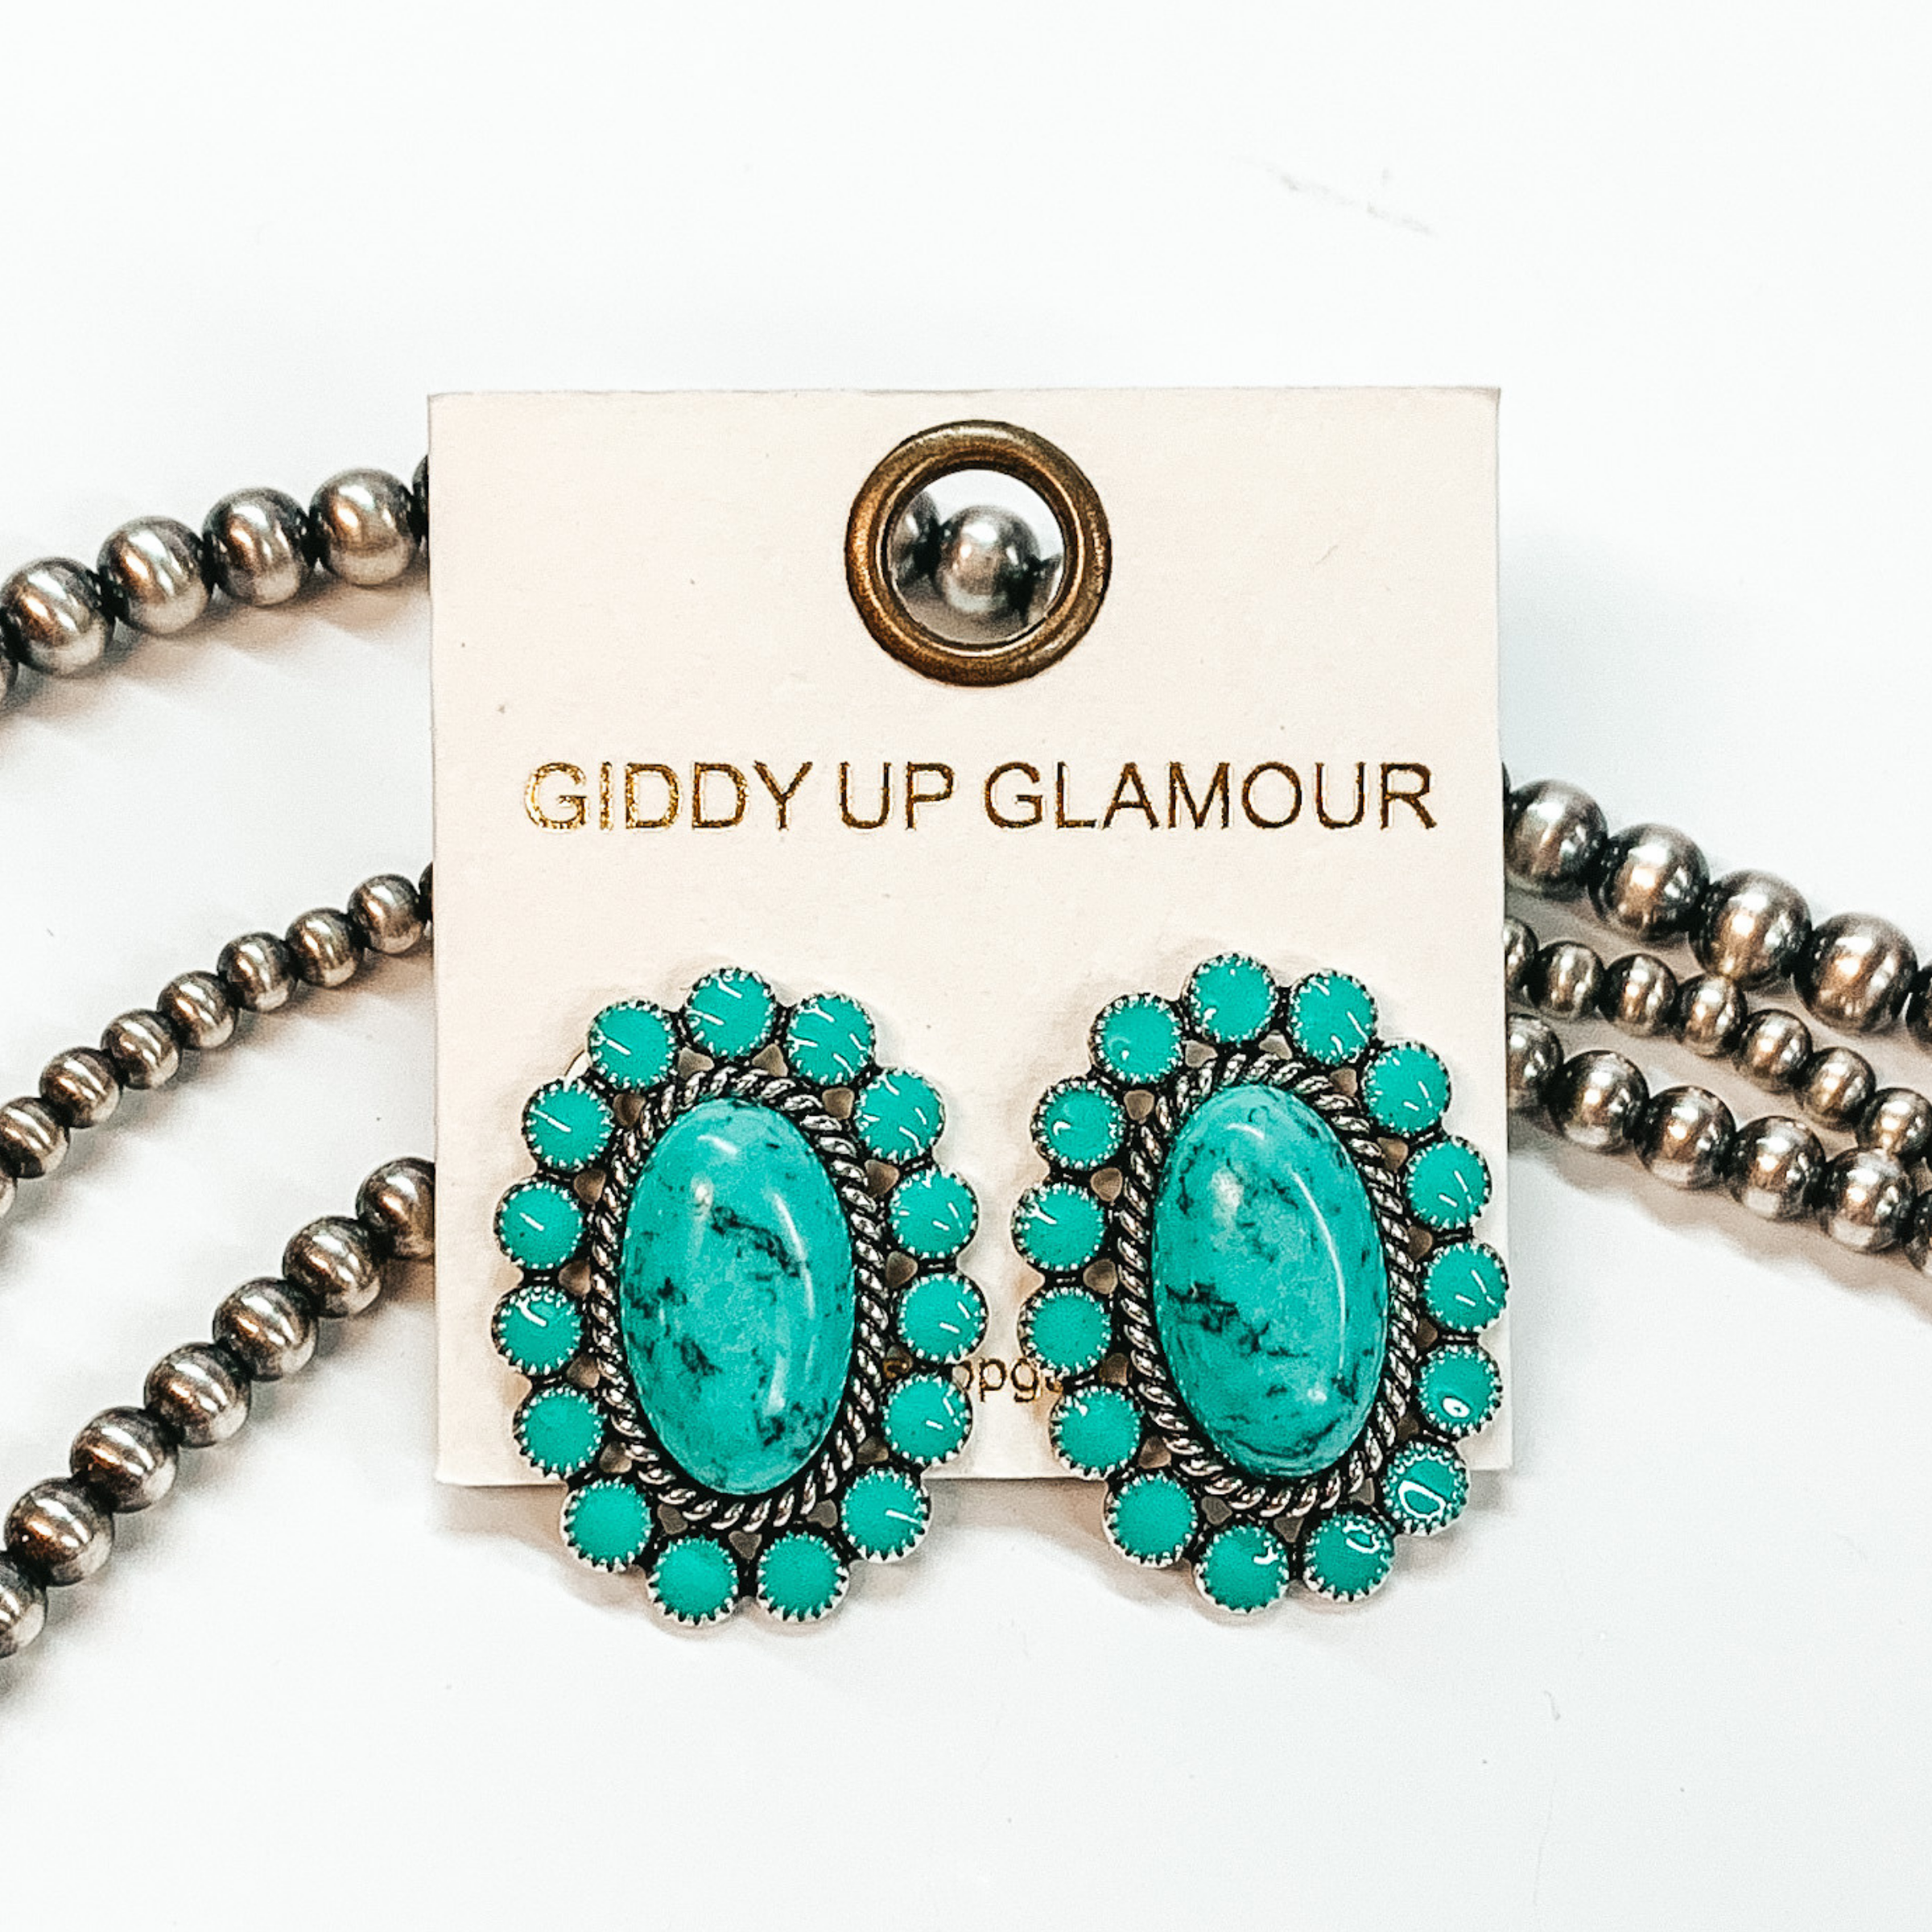 Turquoise concho earrings outlined by  silver detailing and turquoise circles around.  Pictured in a white background with beads as decor.